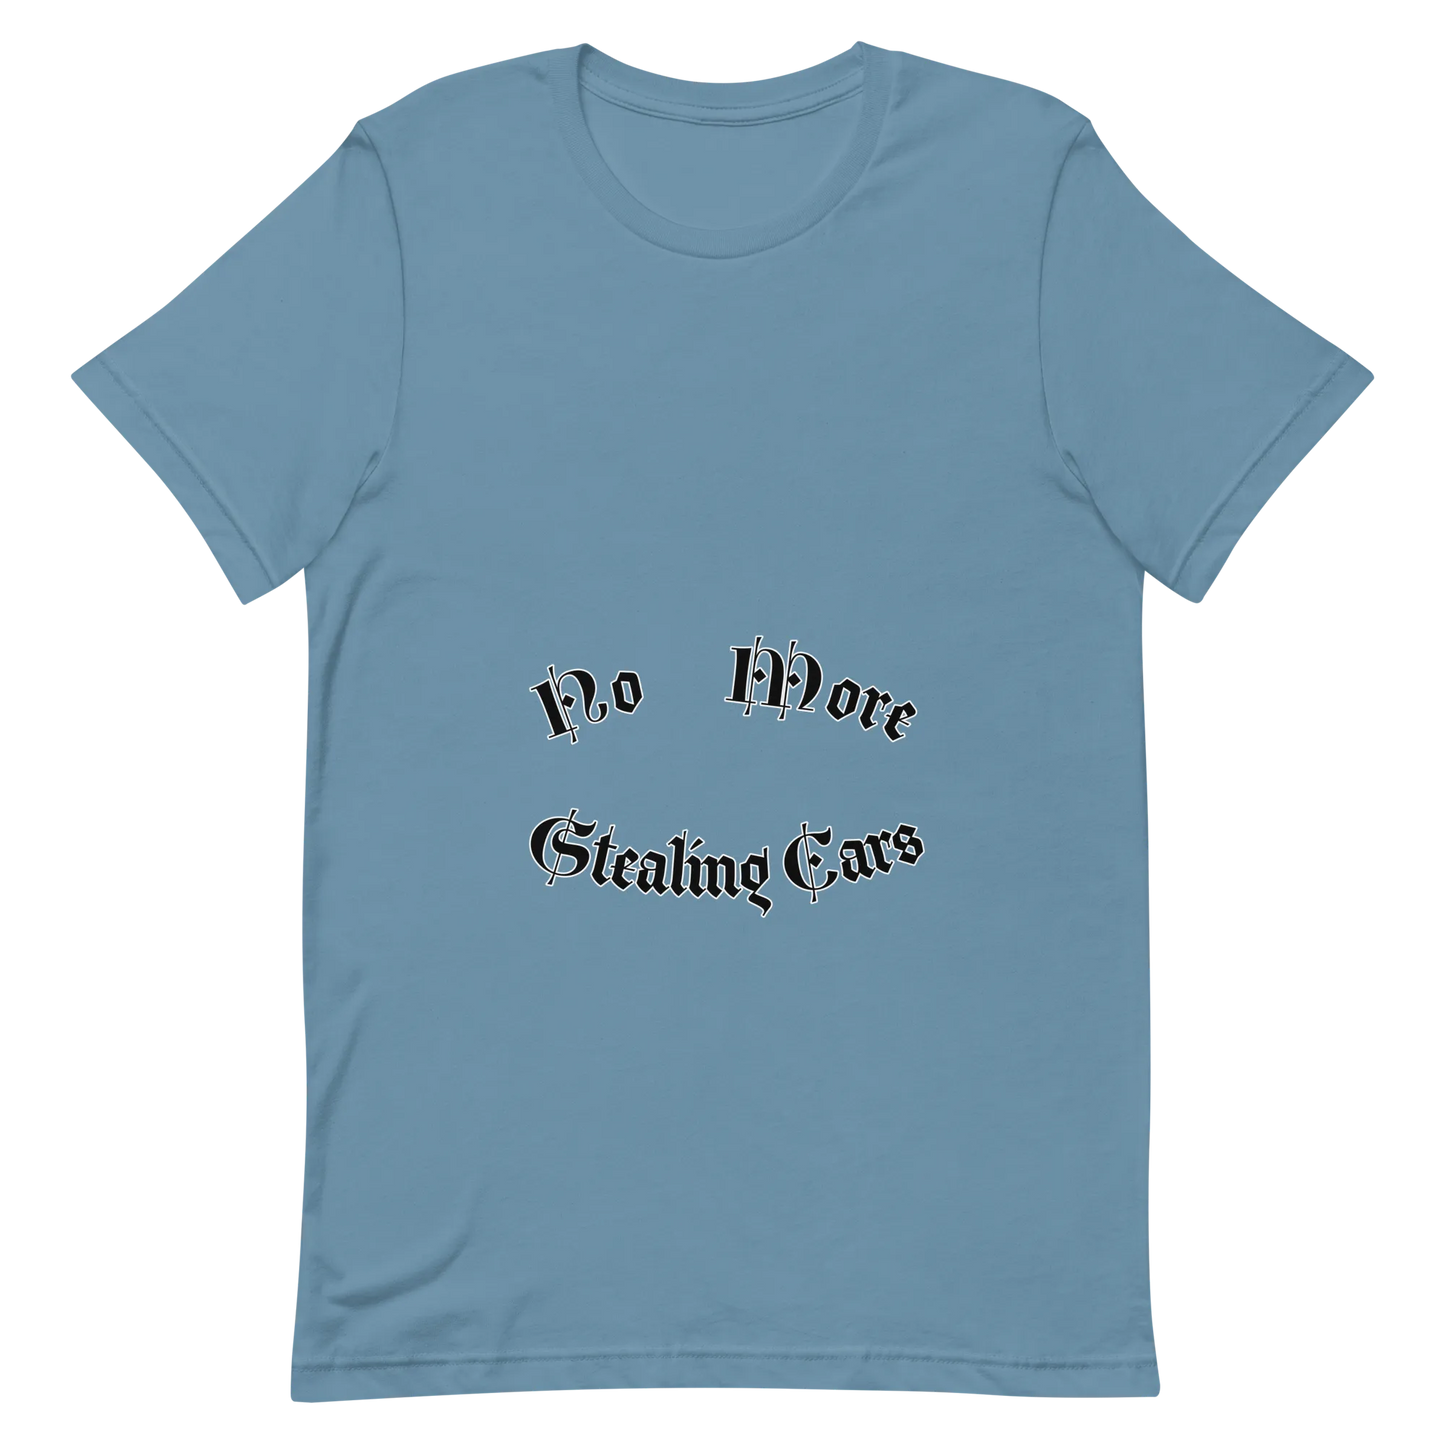 No More Stealing Cars Tee in Steel Blue flatlay